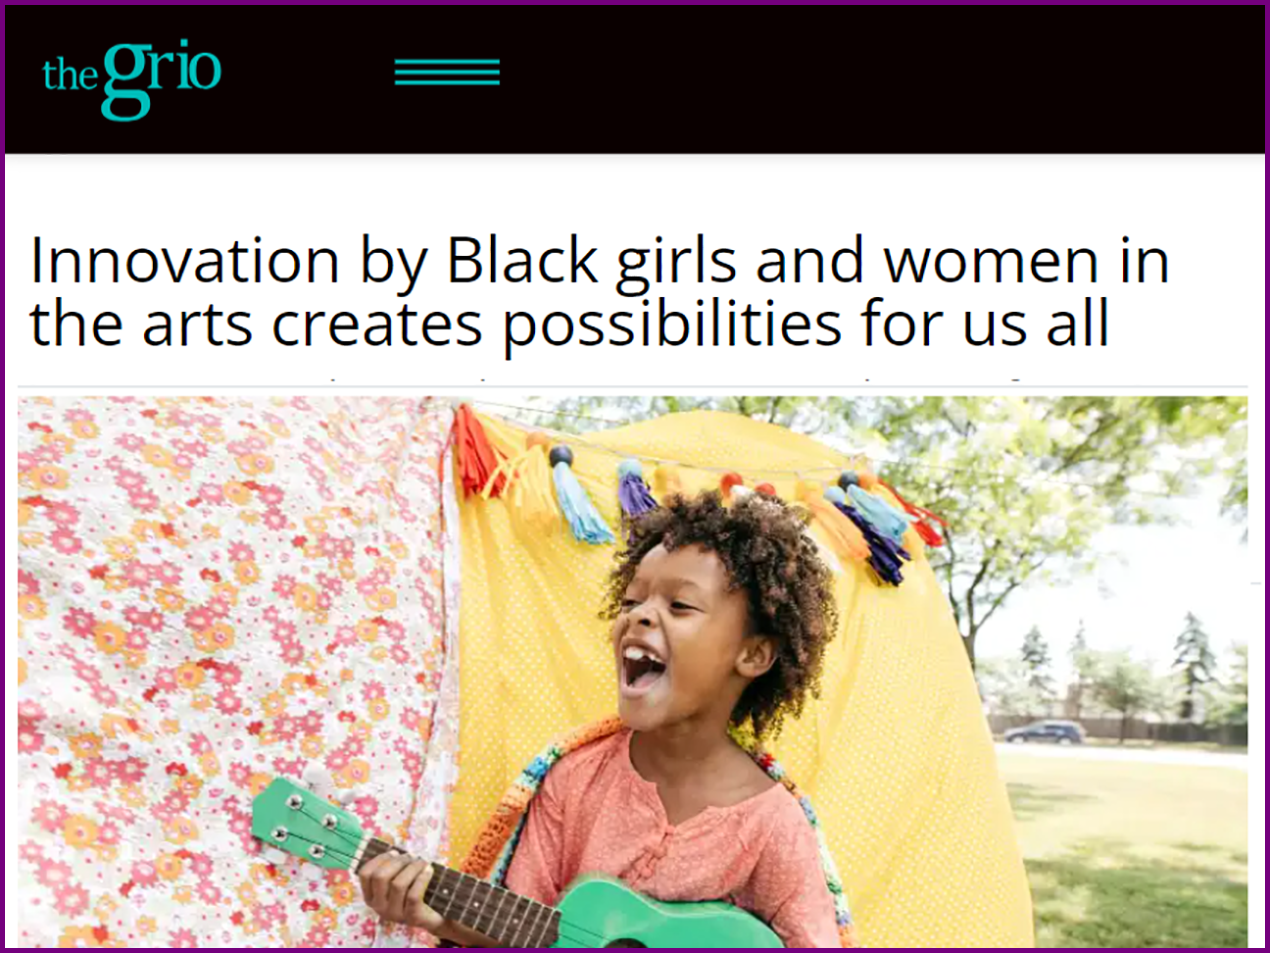 The Grio op-ed: Innovation by Black girls and women in the arts creates possibilities for us all